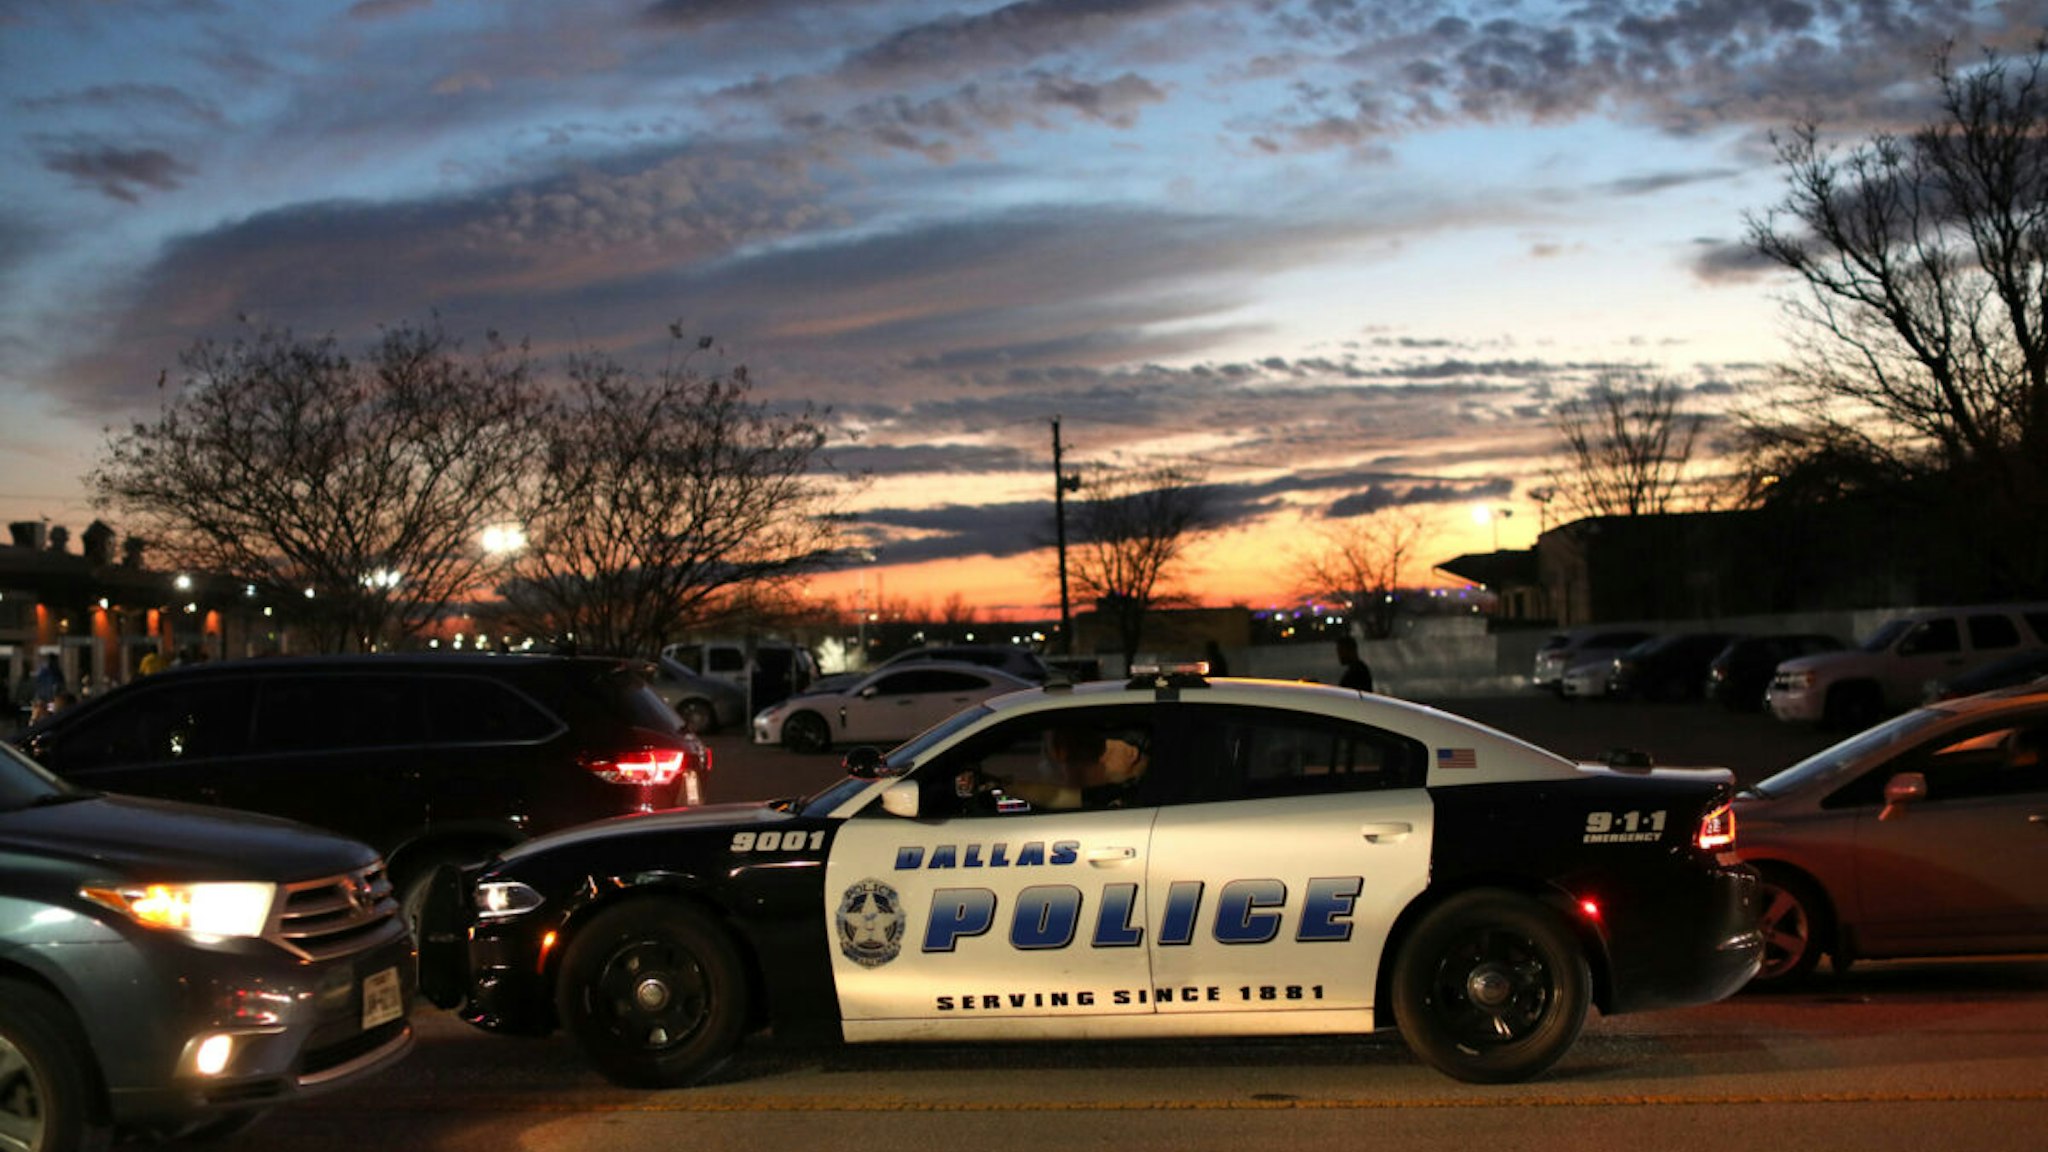 A Dallas Police Department vehicle patrols an area in Dallas, Texas, U.S., on Tuesday, Feb. 1, 2022. As other major U.S. cities double down on policing in response to an increase in homicides and violent crime, Dallas officials are taking a different approach.